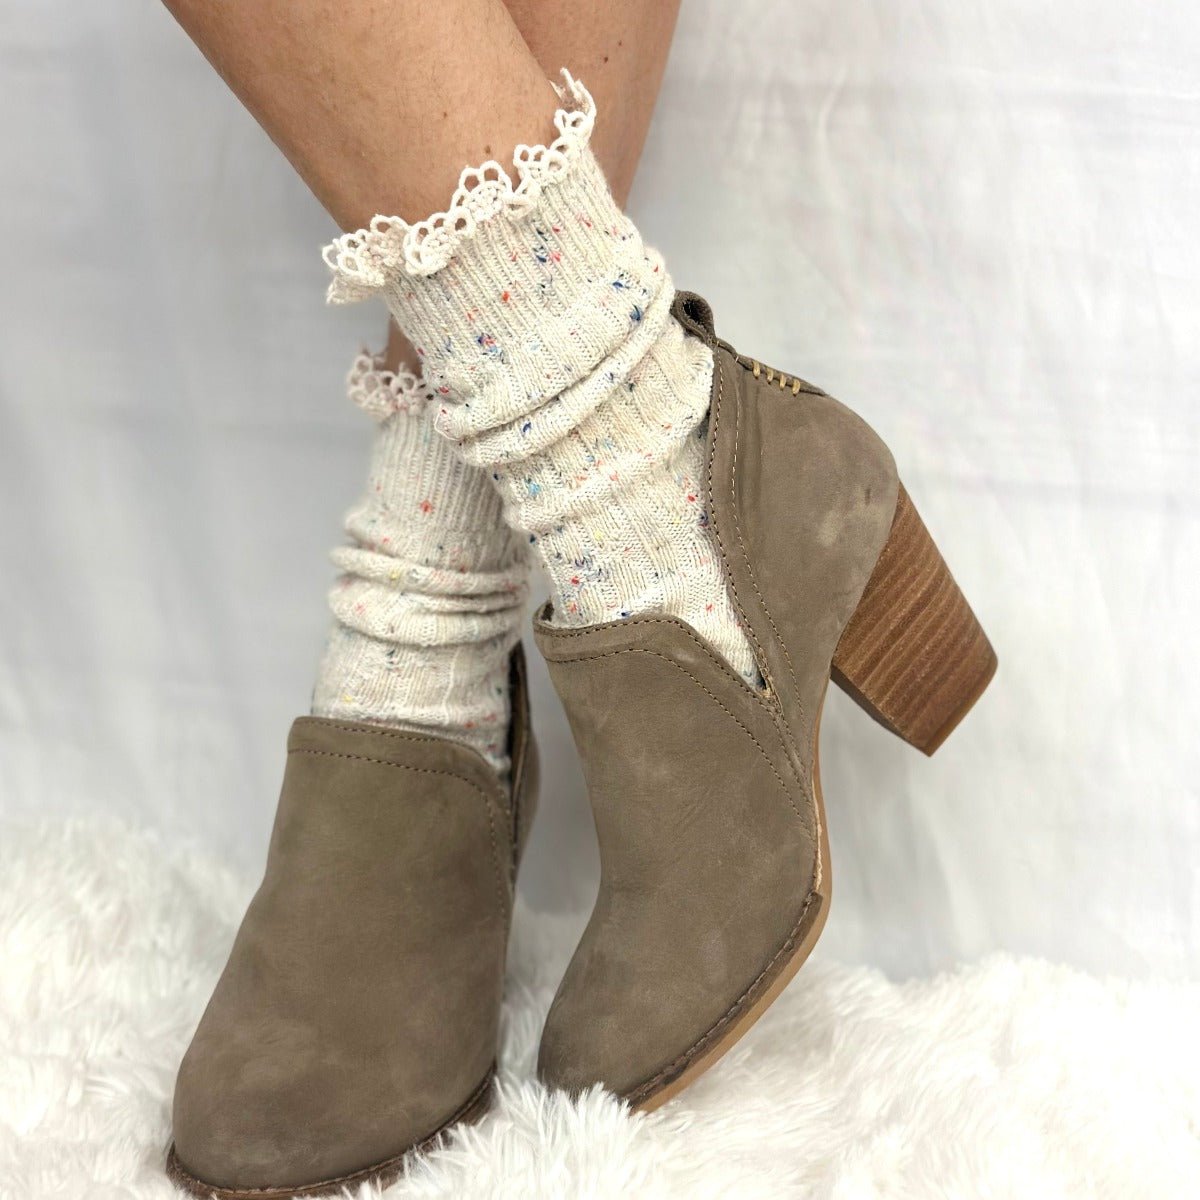 BOOTIE  lace slouch  socks - confetti, cute lace trimmed socks ladies